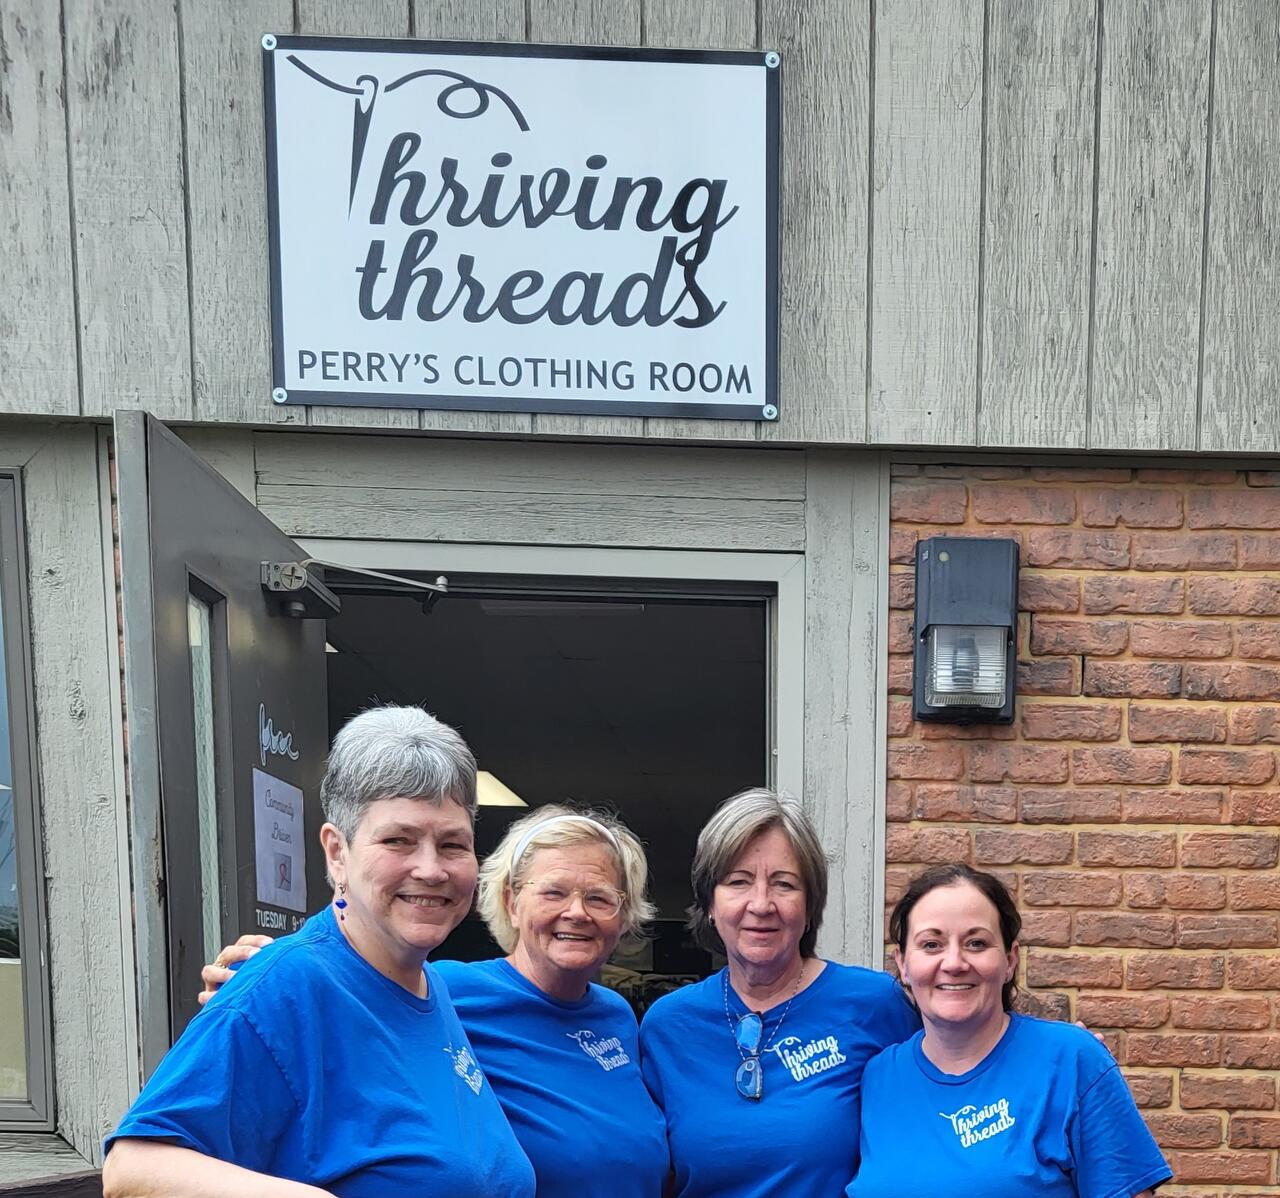 Employees of Thriving Threads (Perry's Clothing Room)